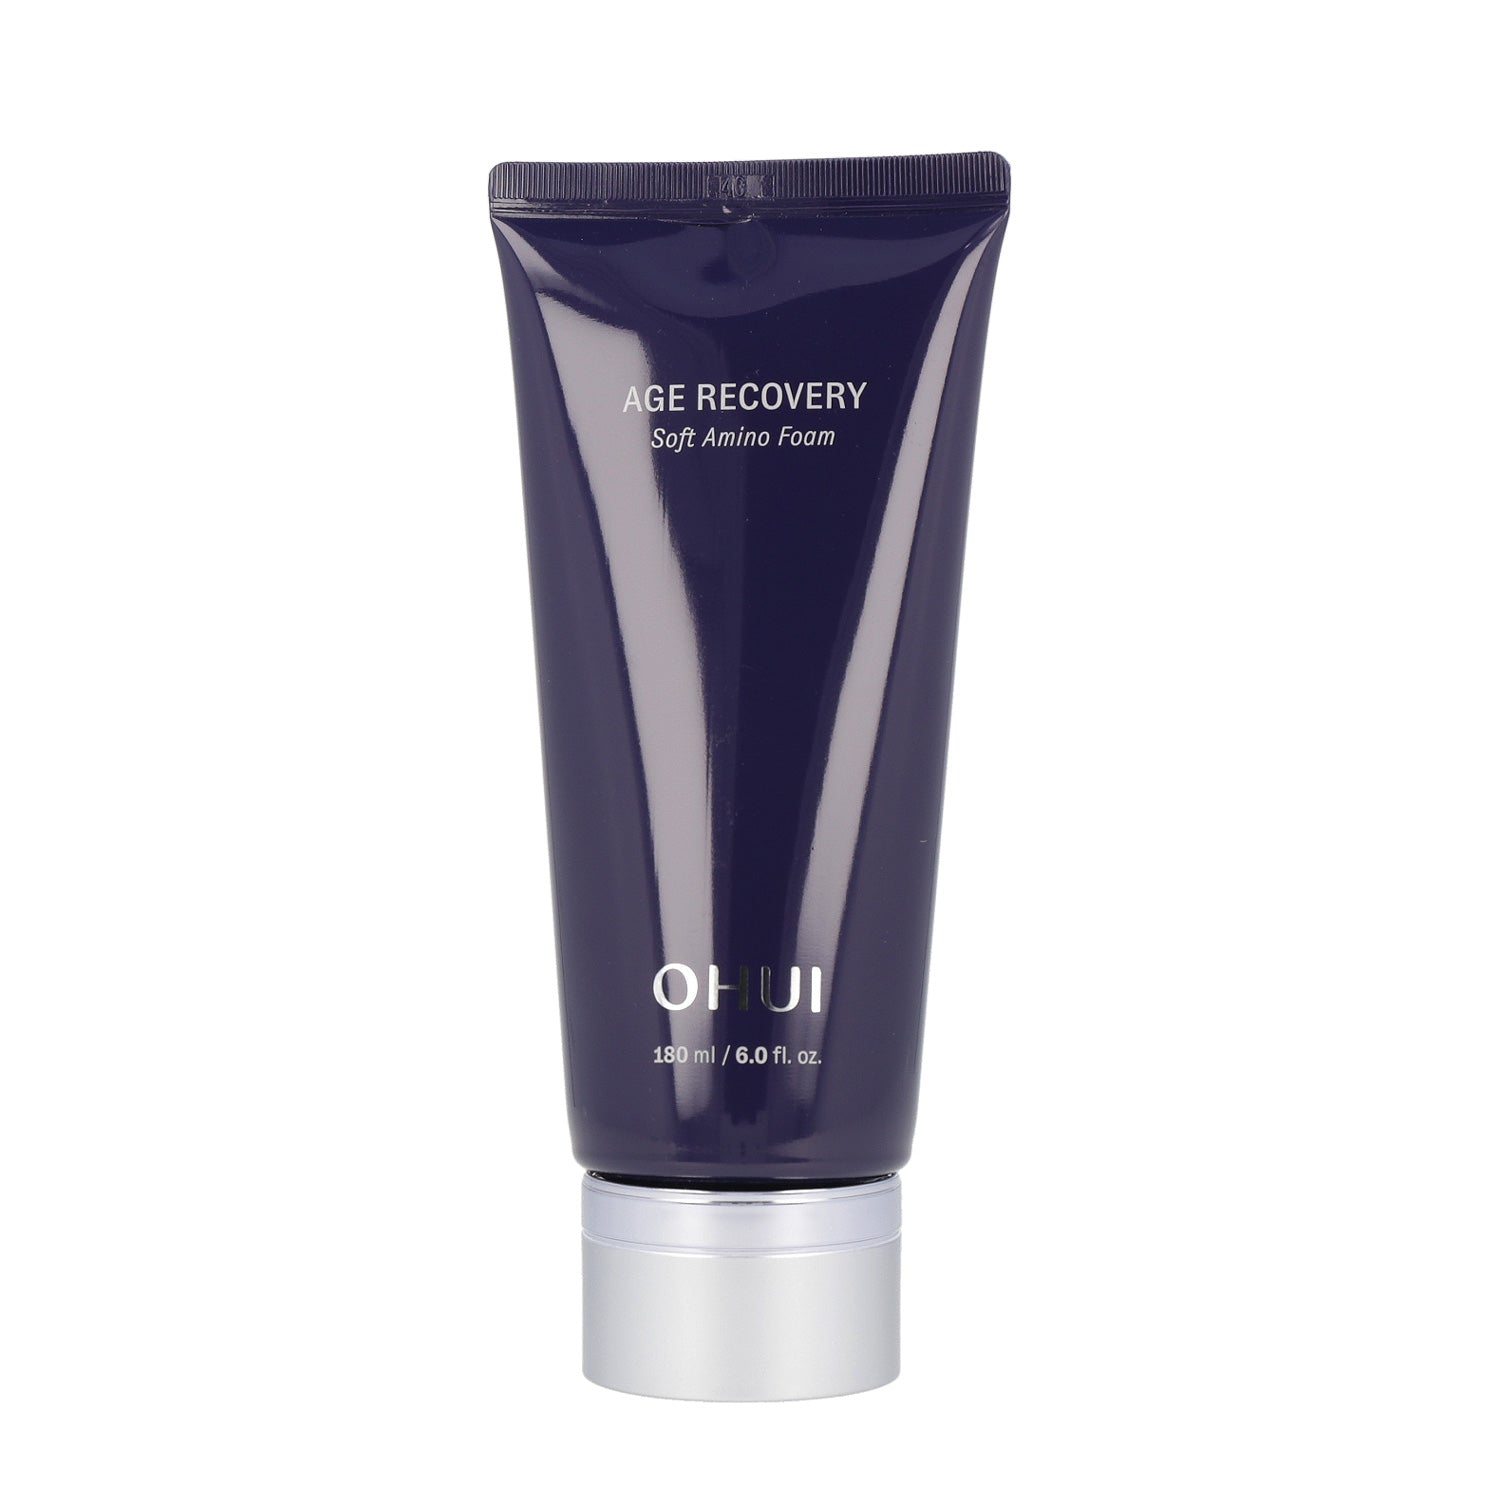 O HUI Age Recovery Soft Amino Foam is a luxurious foam cleanser designed to gently cleanse the skin while providing anti-aging benefits.